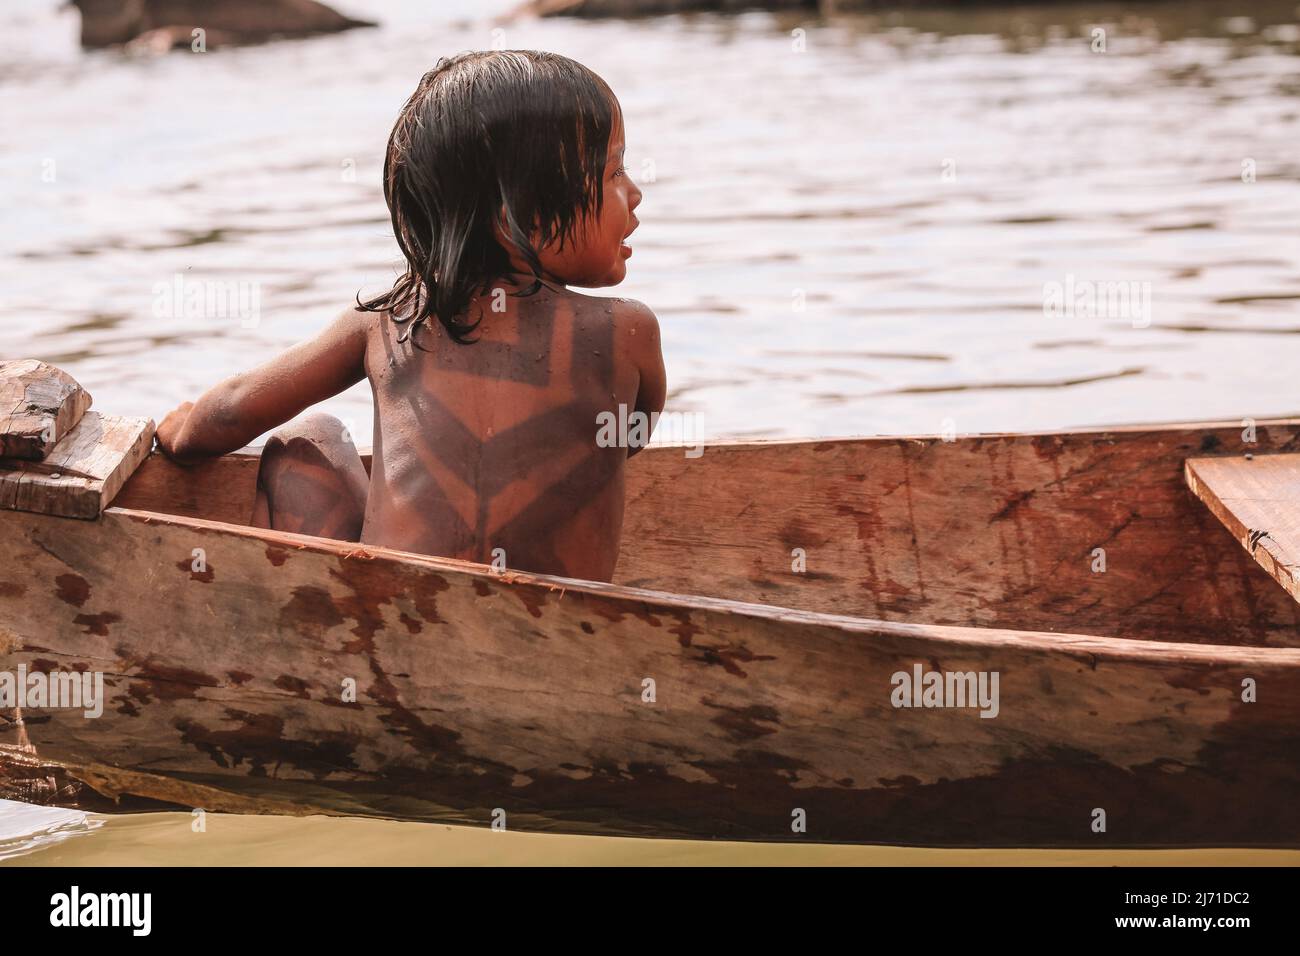 Indian child from the Asurini tribe in Brazil, playing inside a canoe in the Amazon River. 2010. Stock Photo